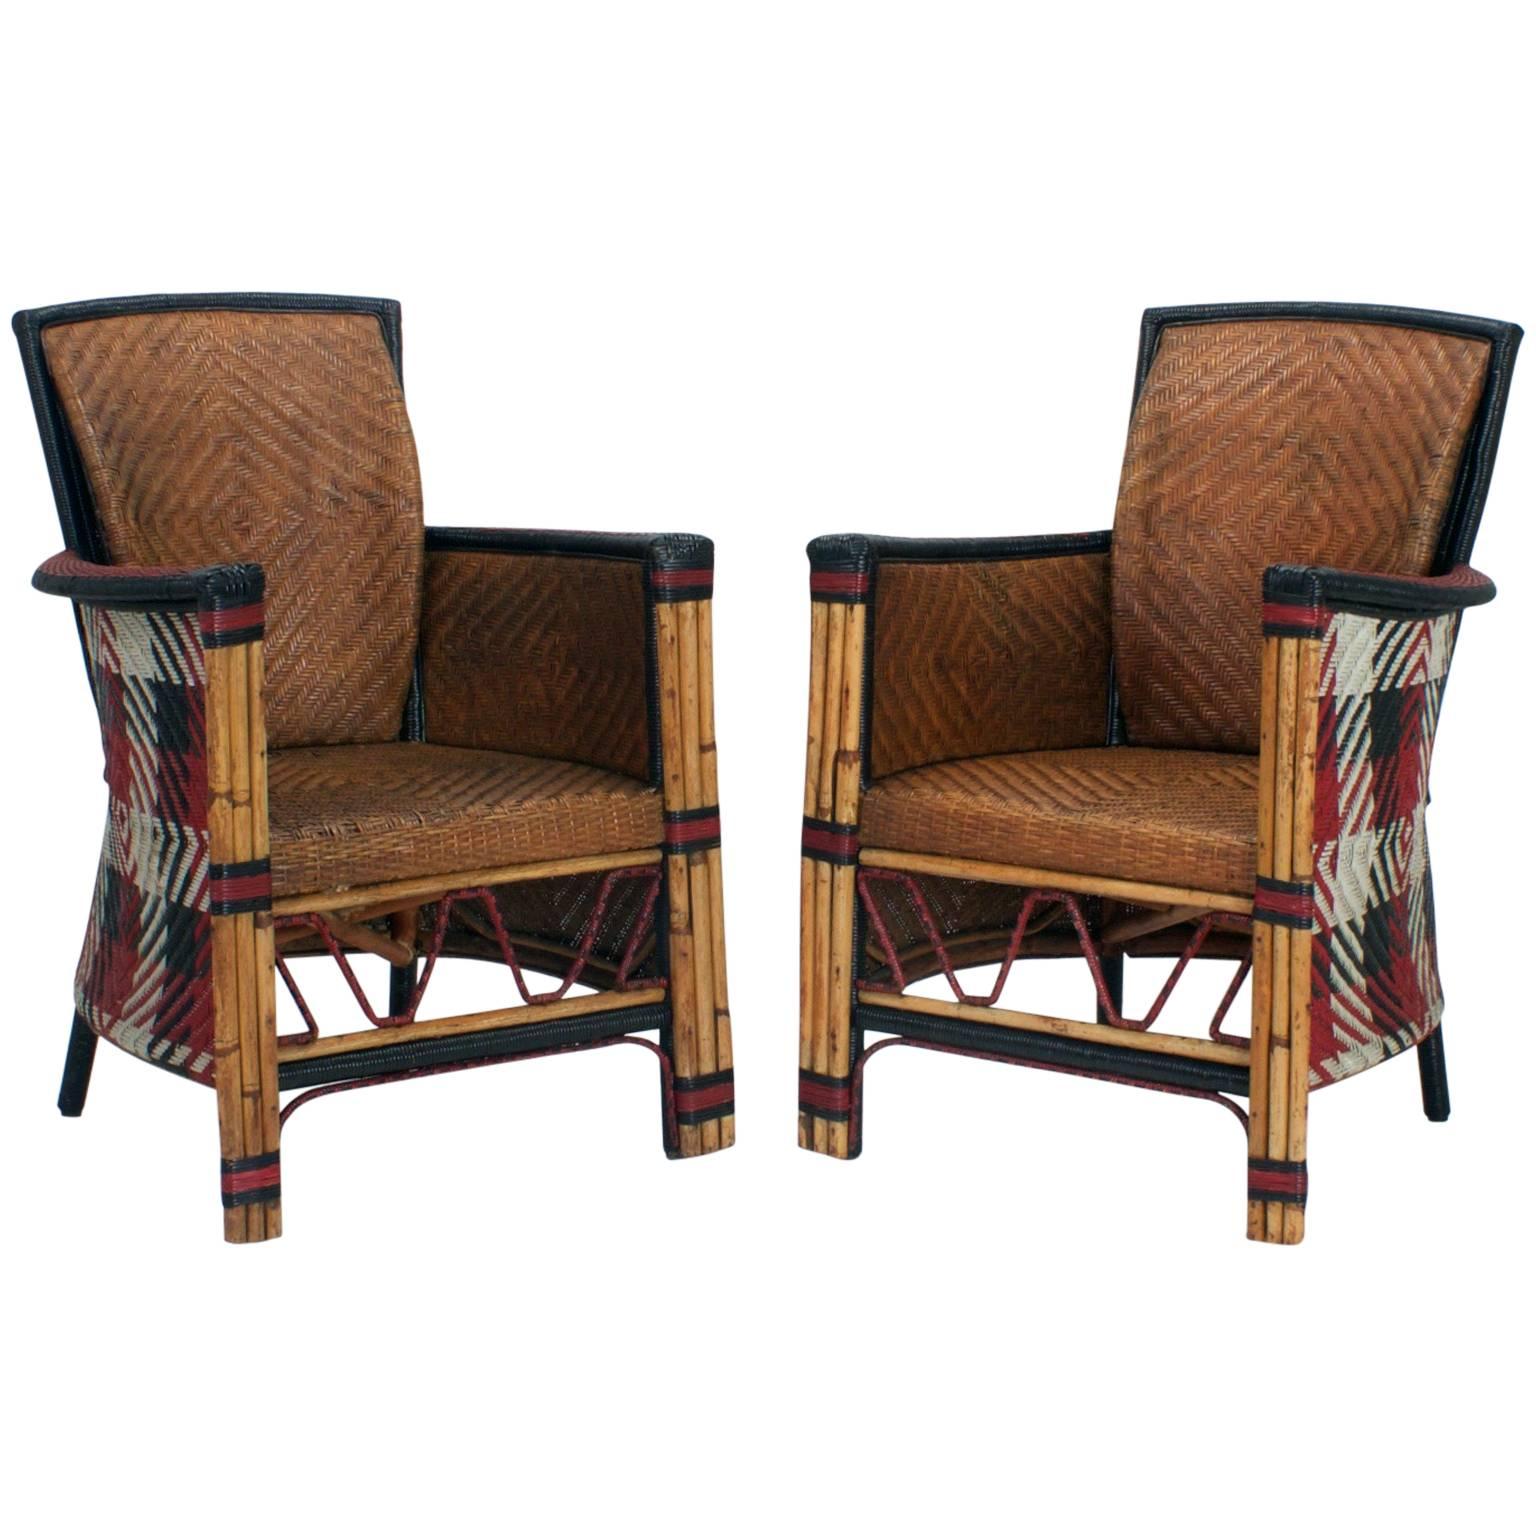 Pair of Rare Woven Cane Armchairs with Painted Backs